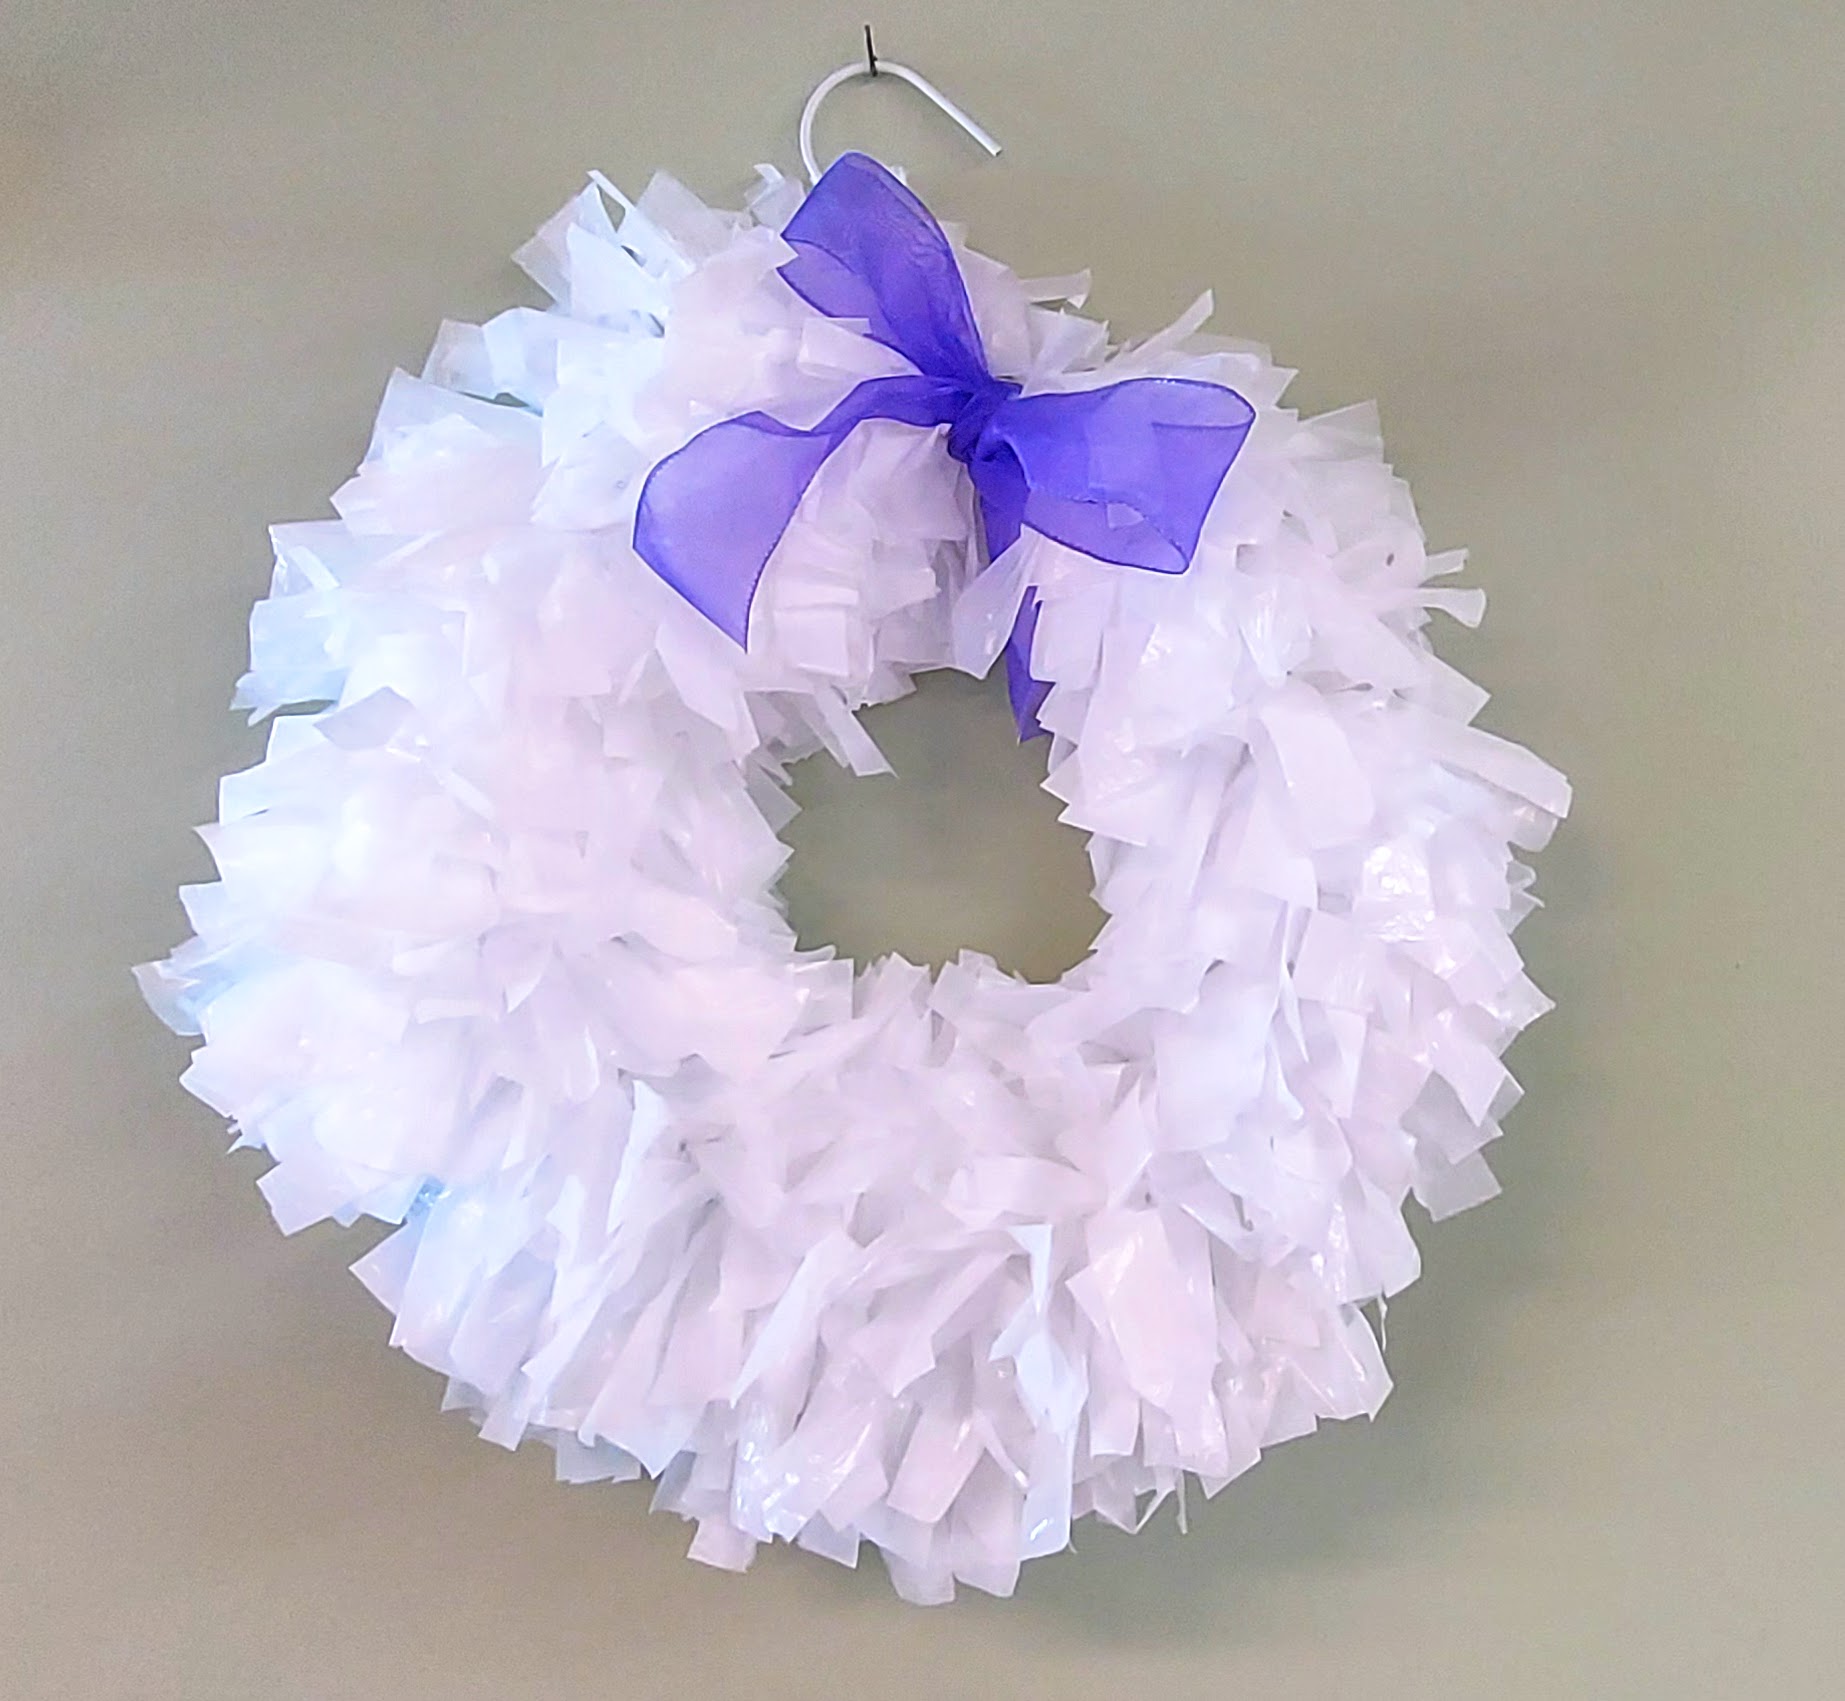 Image of white wreath with a purple bow.